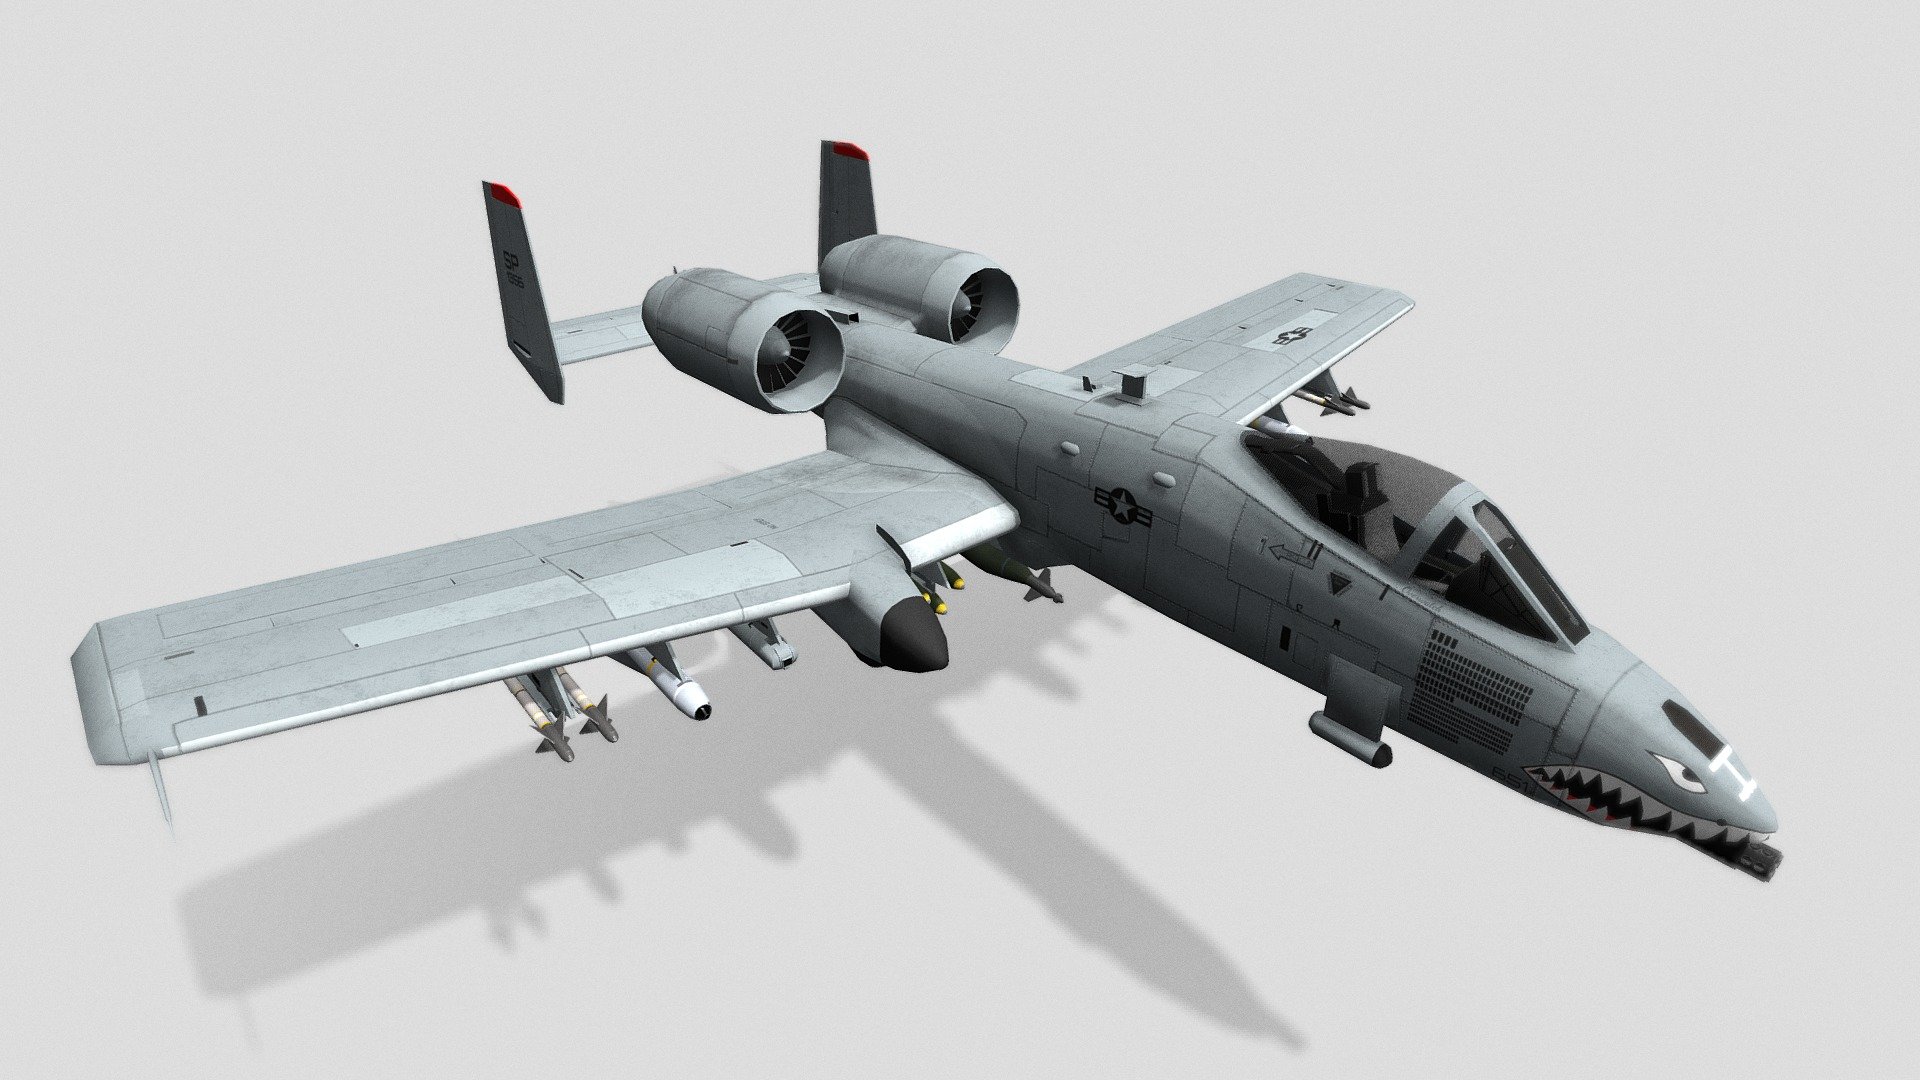 This is the textured version of an A-10 Warthog I've been working on in Blender! The model comes with four different types of bombs and missiles that can be setup in many payload variations. Fully rigged version coming soon!!

The .blend file is available for download on my Patreon: patreon.com/JacobDesigns - A-10 Thunderbolt II - 3D model by Jacobdesigns 3d model